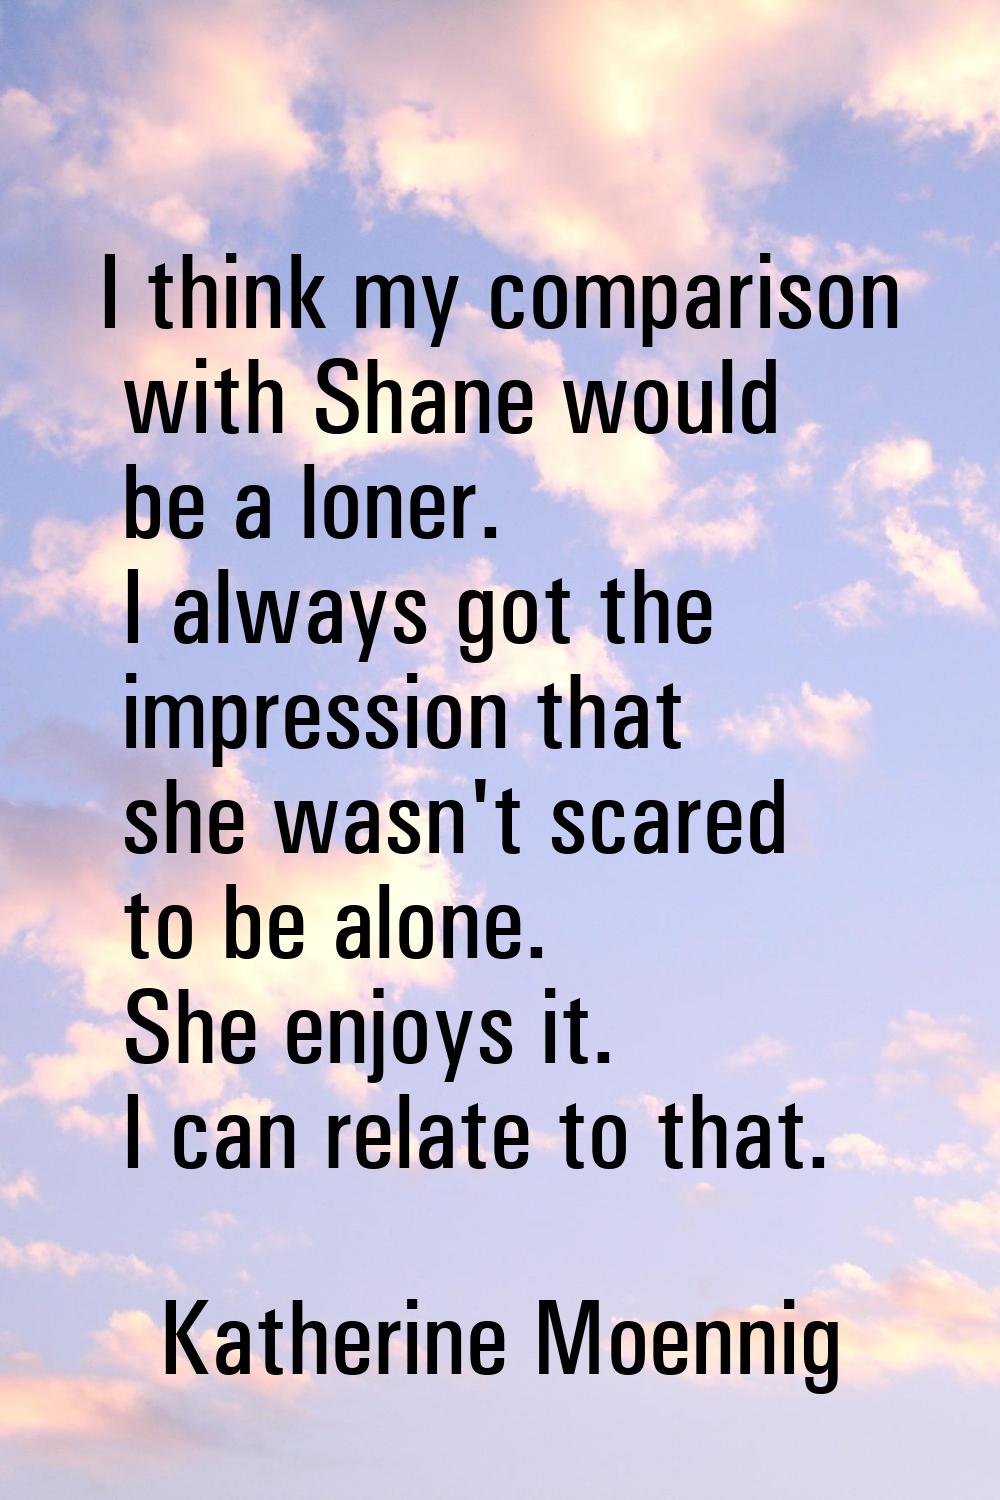 I think my comparison with Shane would be a loner. I always got the impression that she wasn't scar